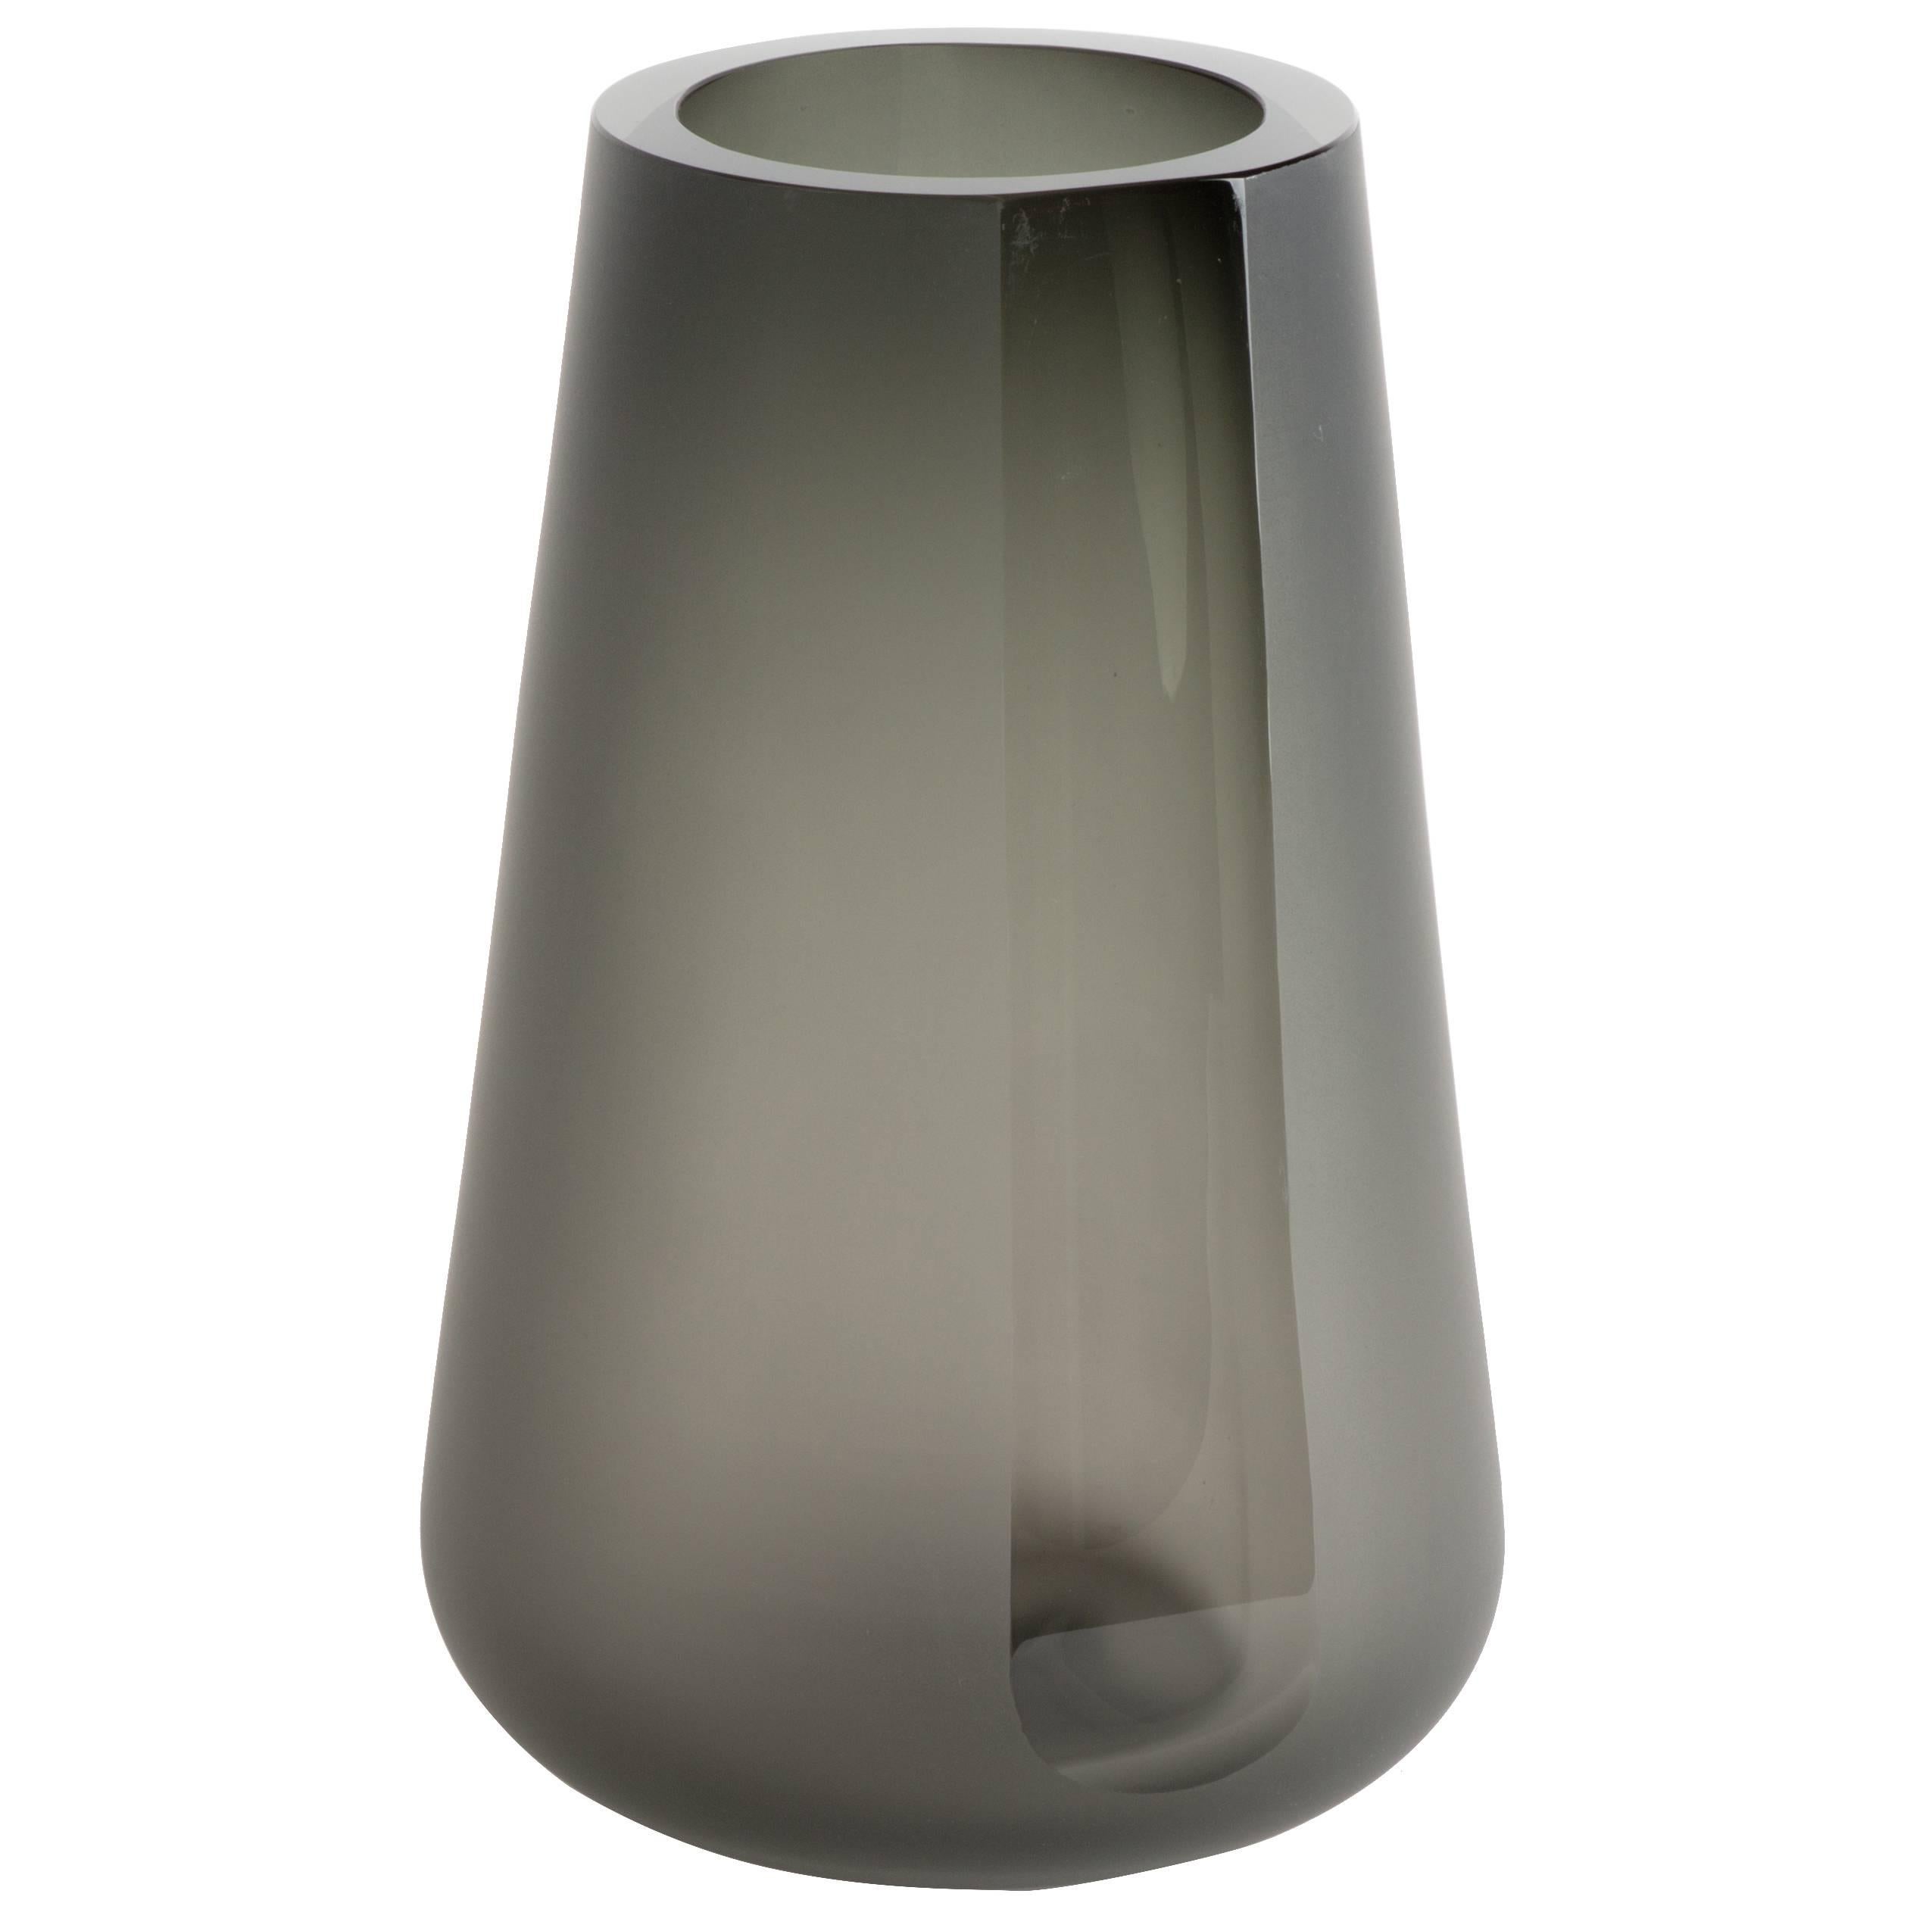 The Porto vase extra large is a simple exercise in optics and color. The smoke grey color and reflective light are diffused by a surface etching. A single panel, or 